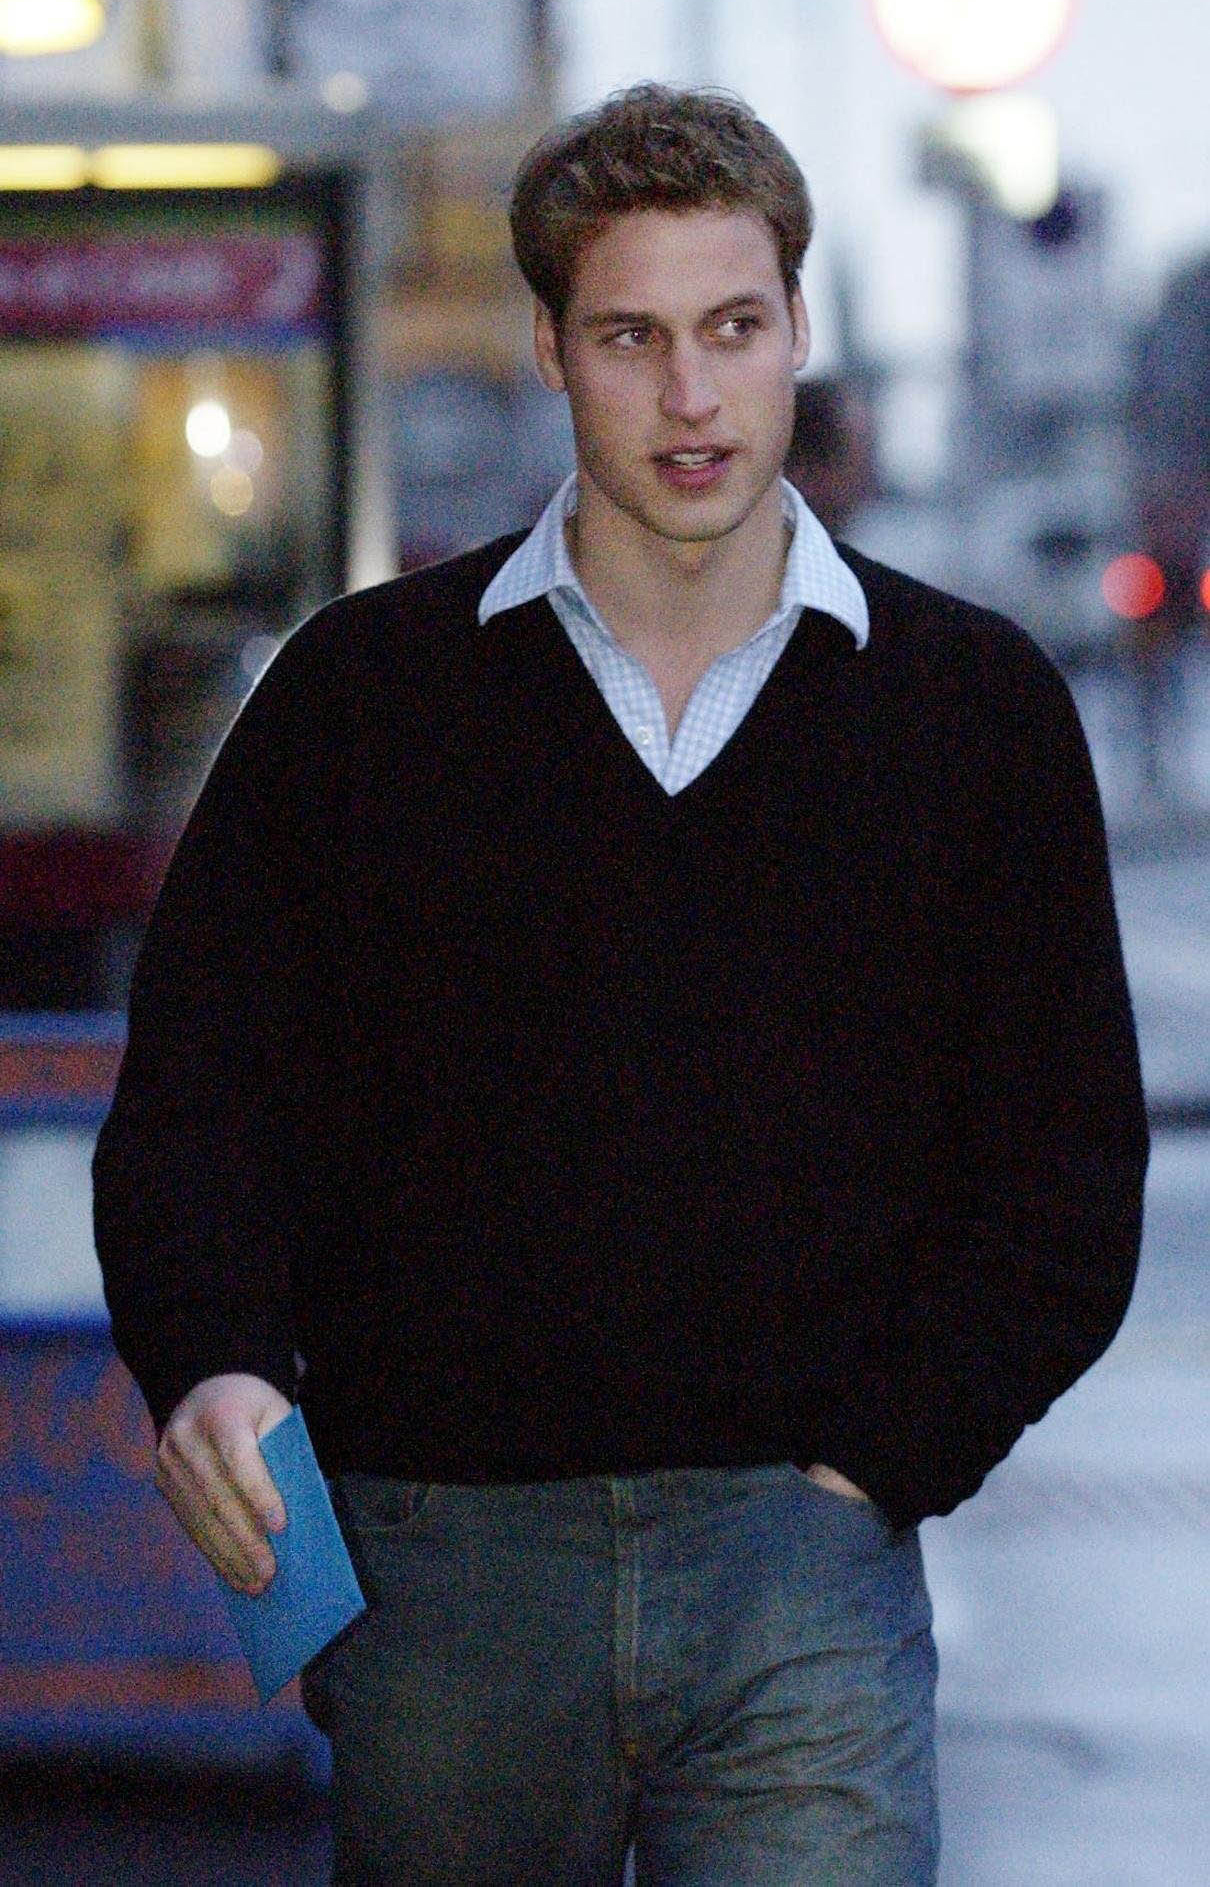 Prince William in December 2003 | Source: Getty Images